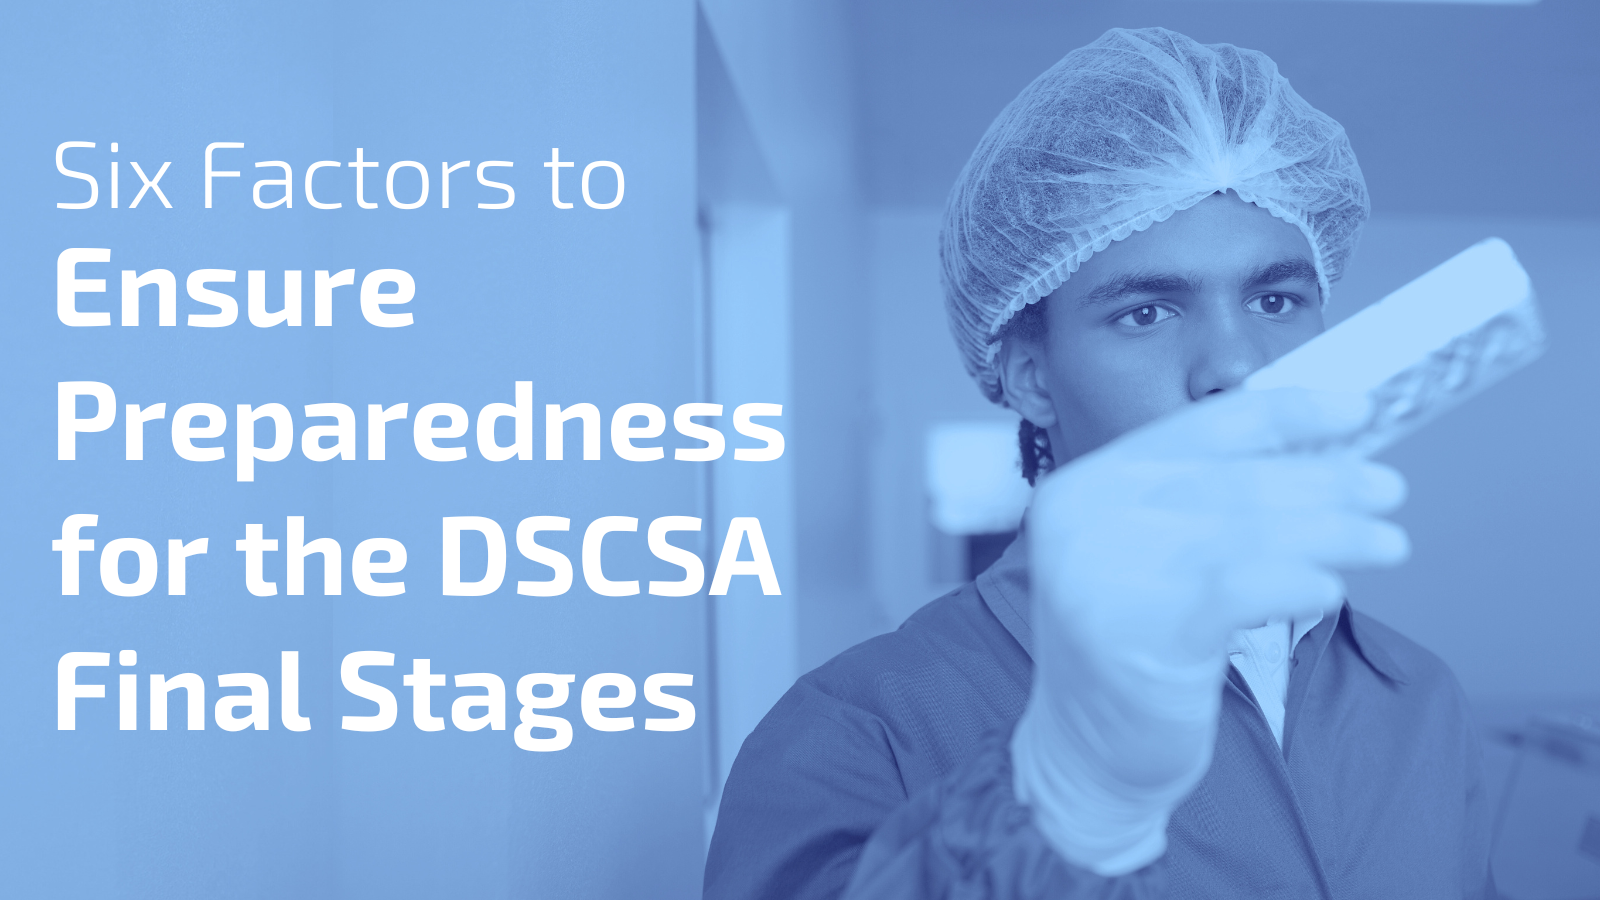 Six Factors to Ensure Preparedness for the DSCSA Final Stages